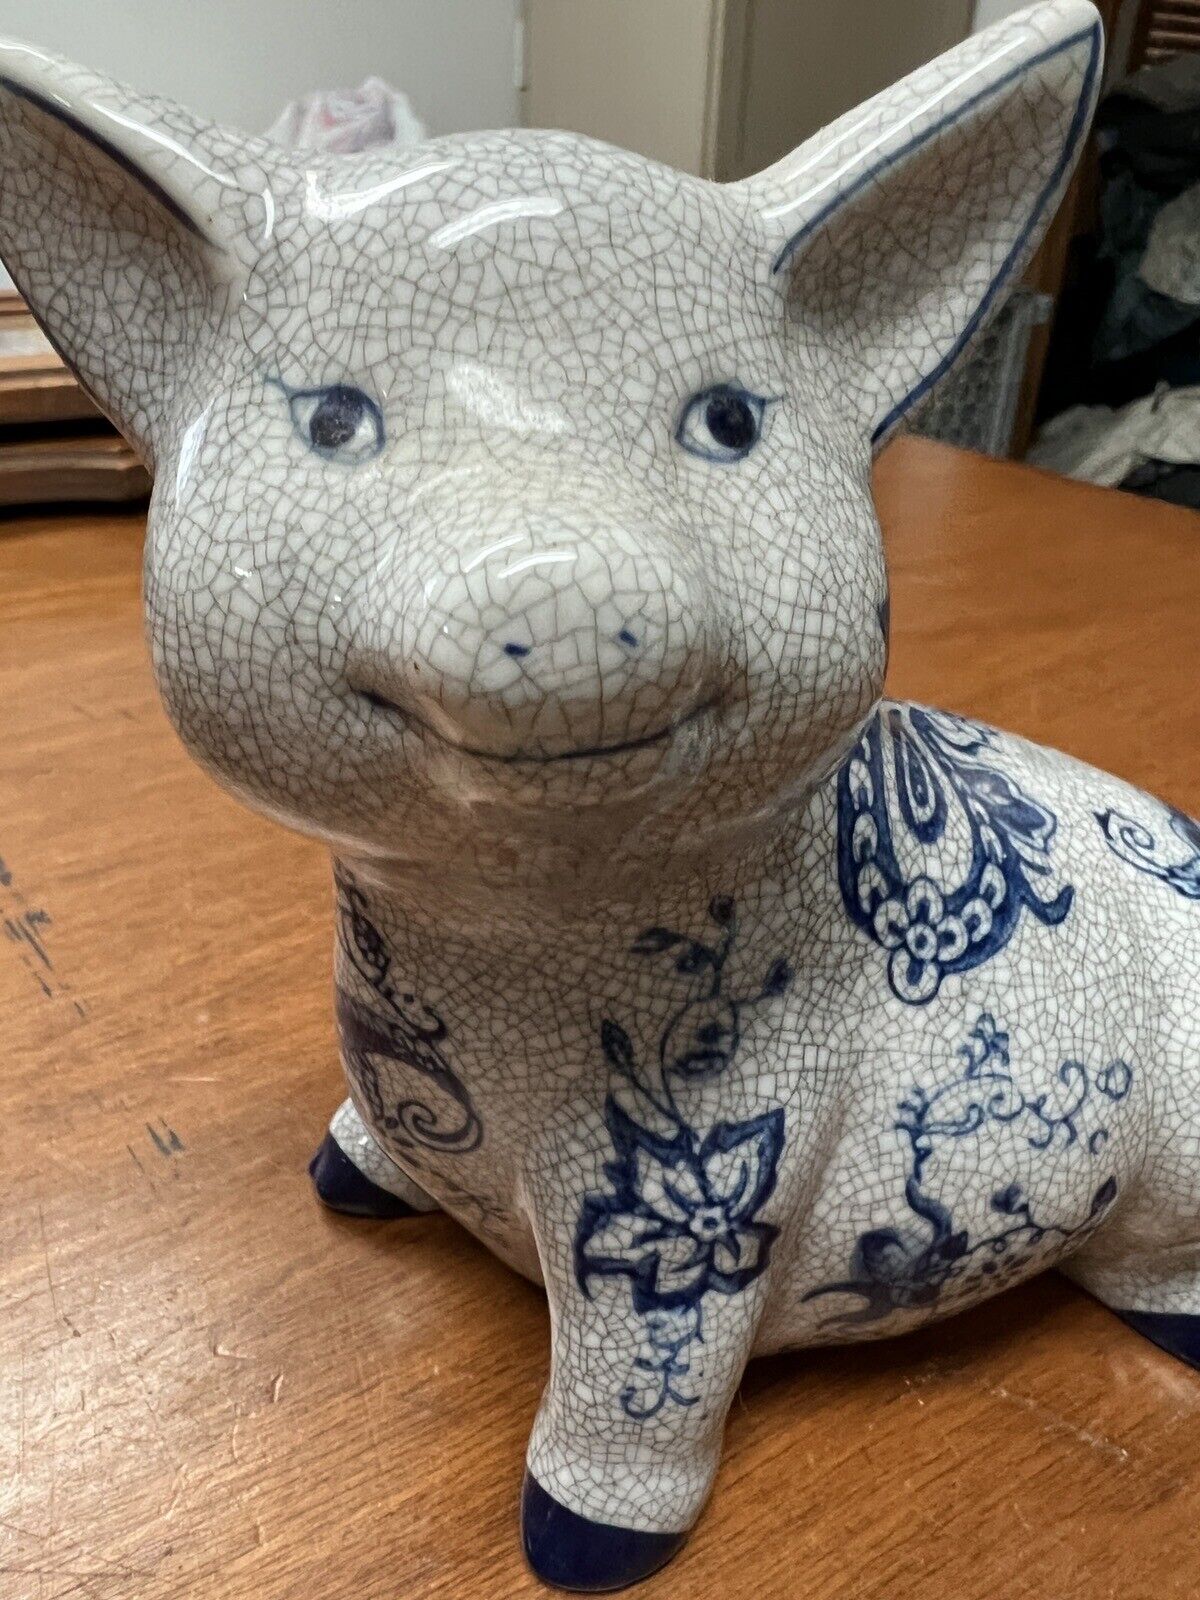 SALE 25% off Vintage Baum Blue and White Ceramic Pig (price already reduced)